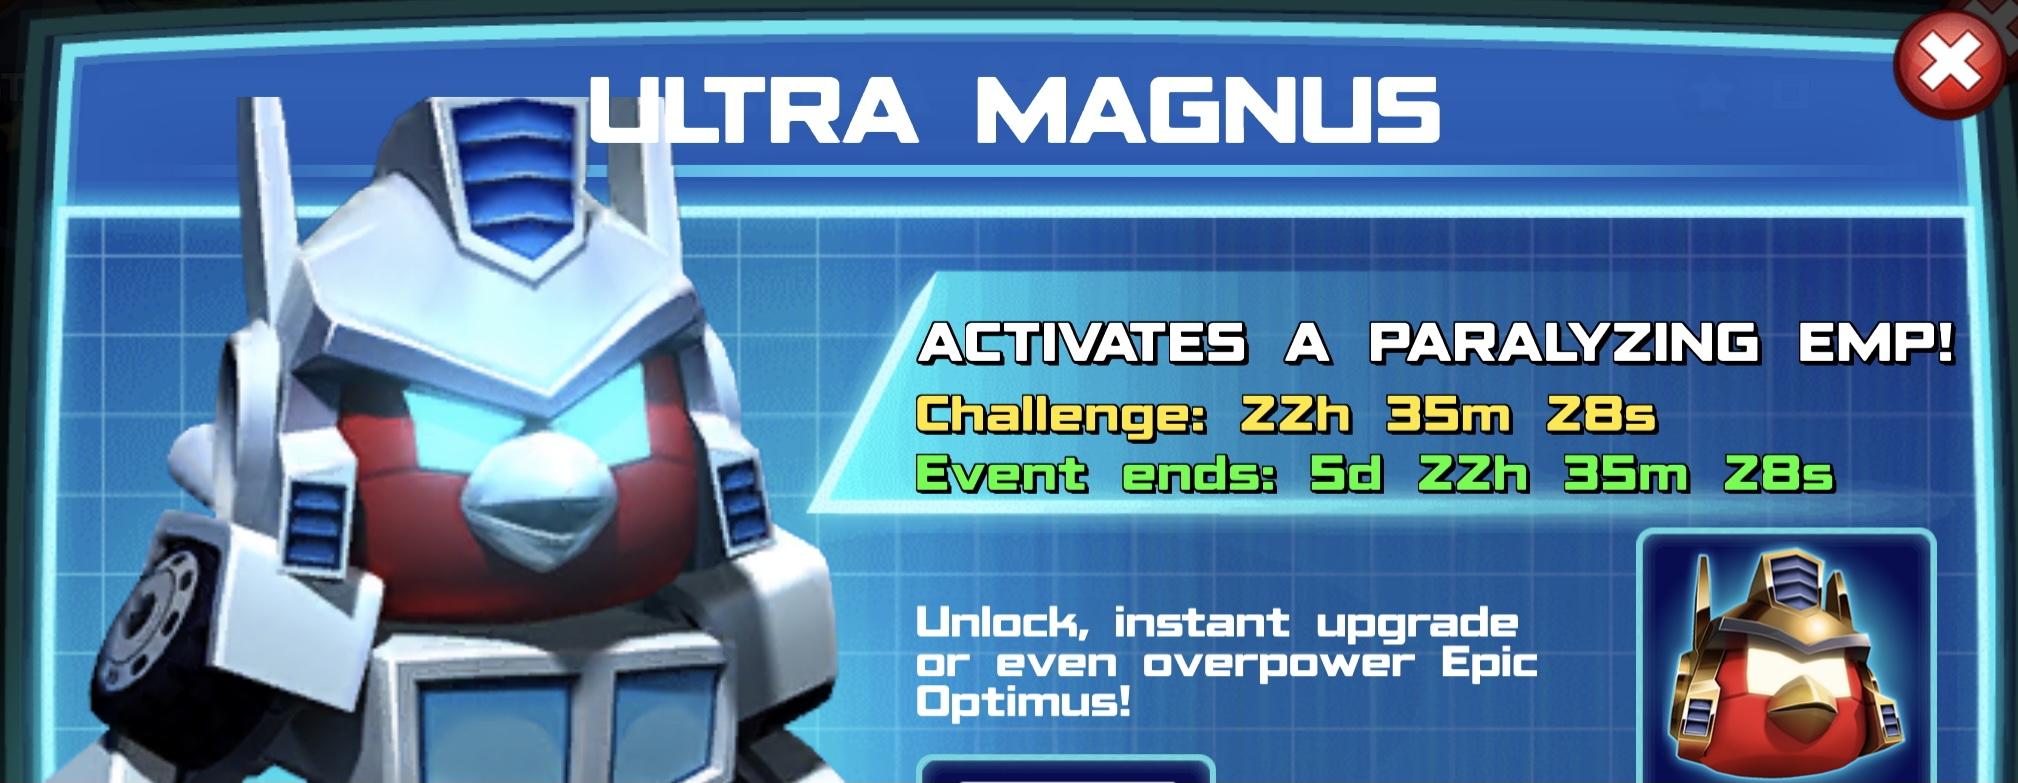 The event banner for Ultra Magnus